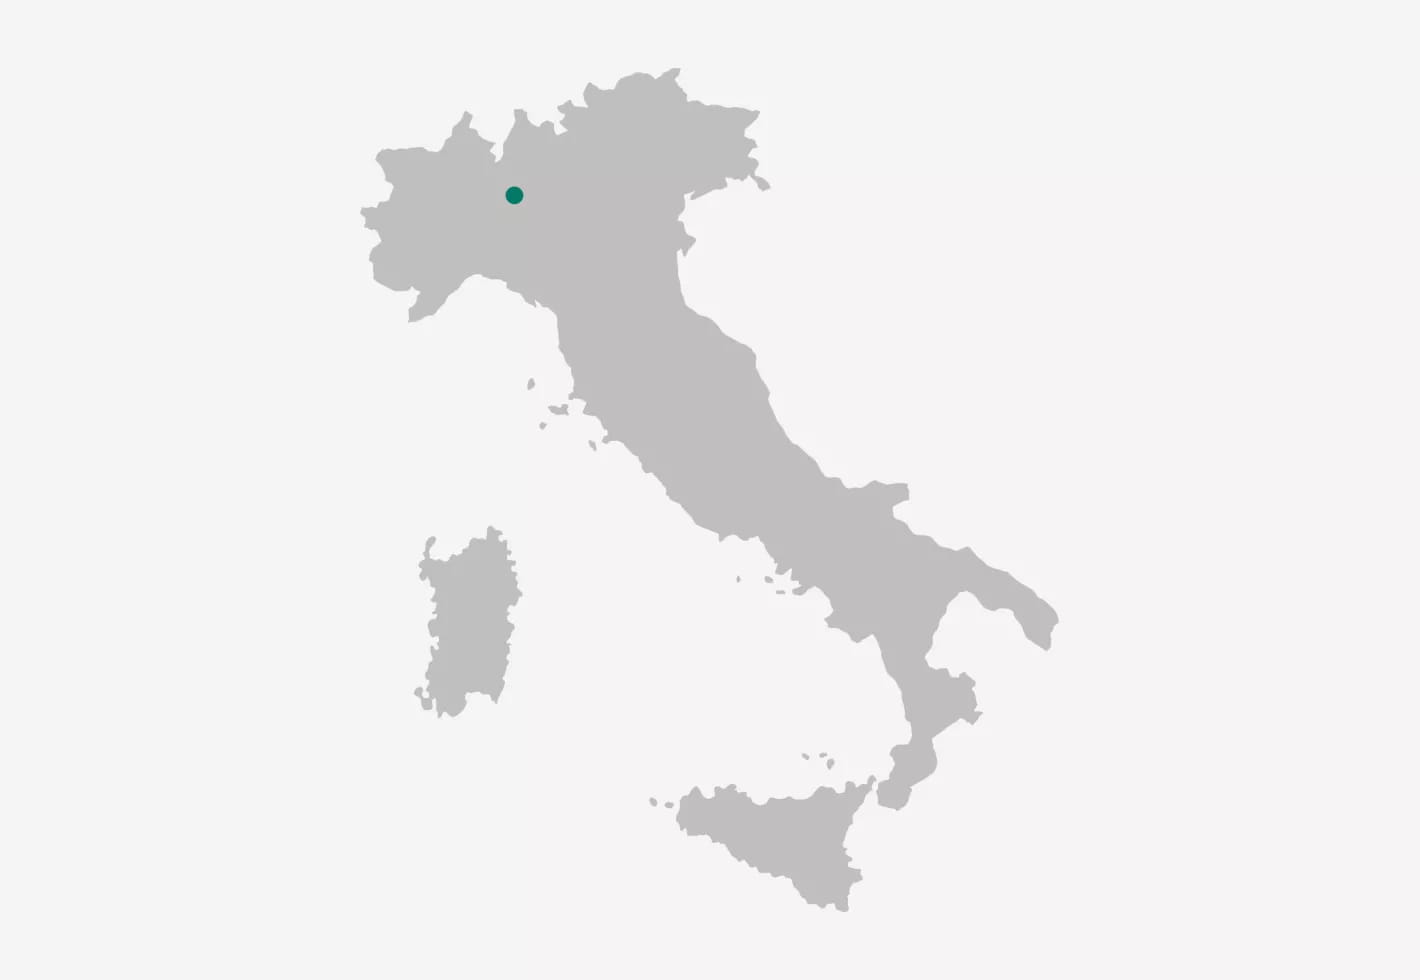 Our presence in Italy